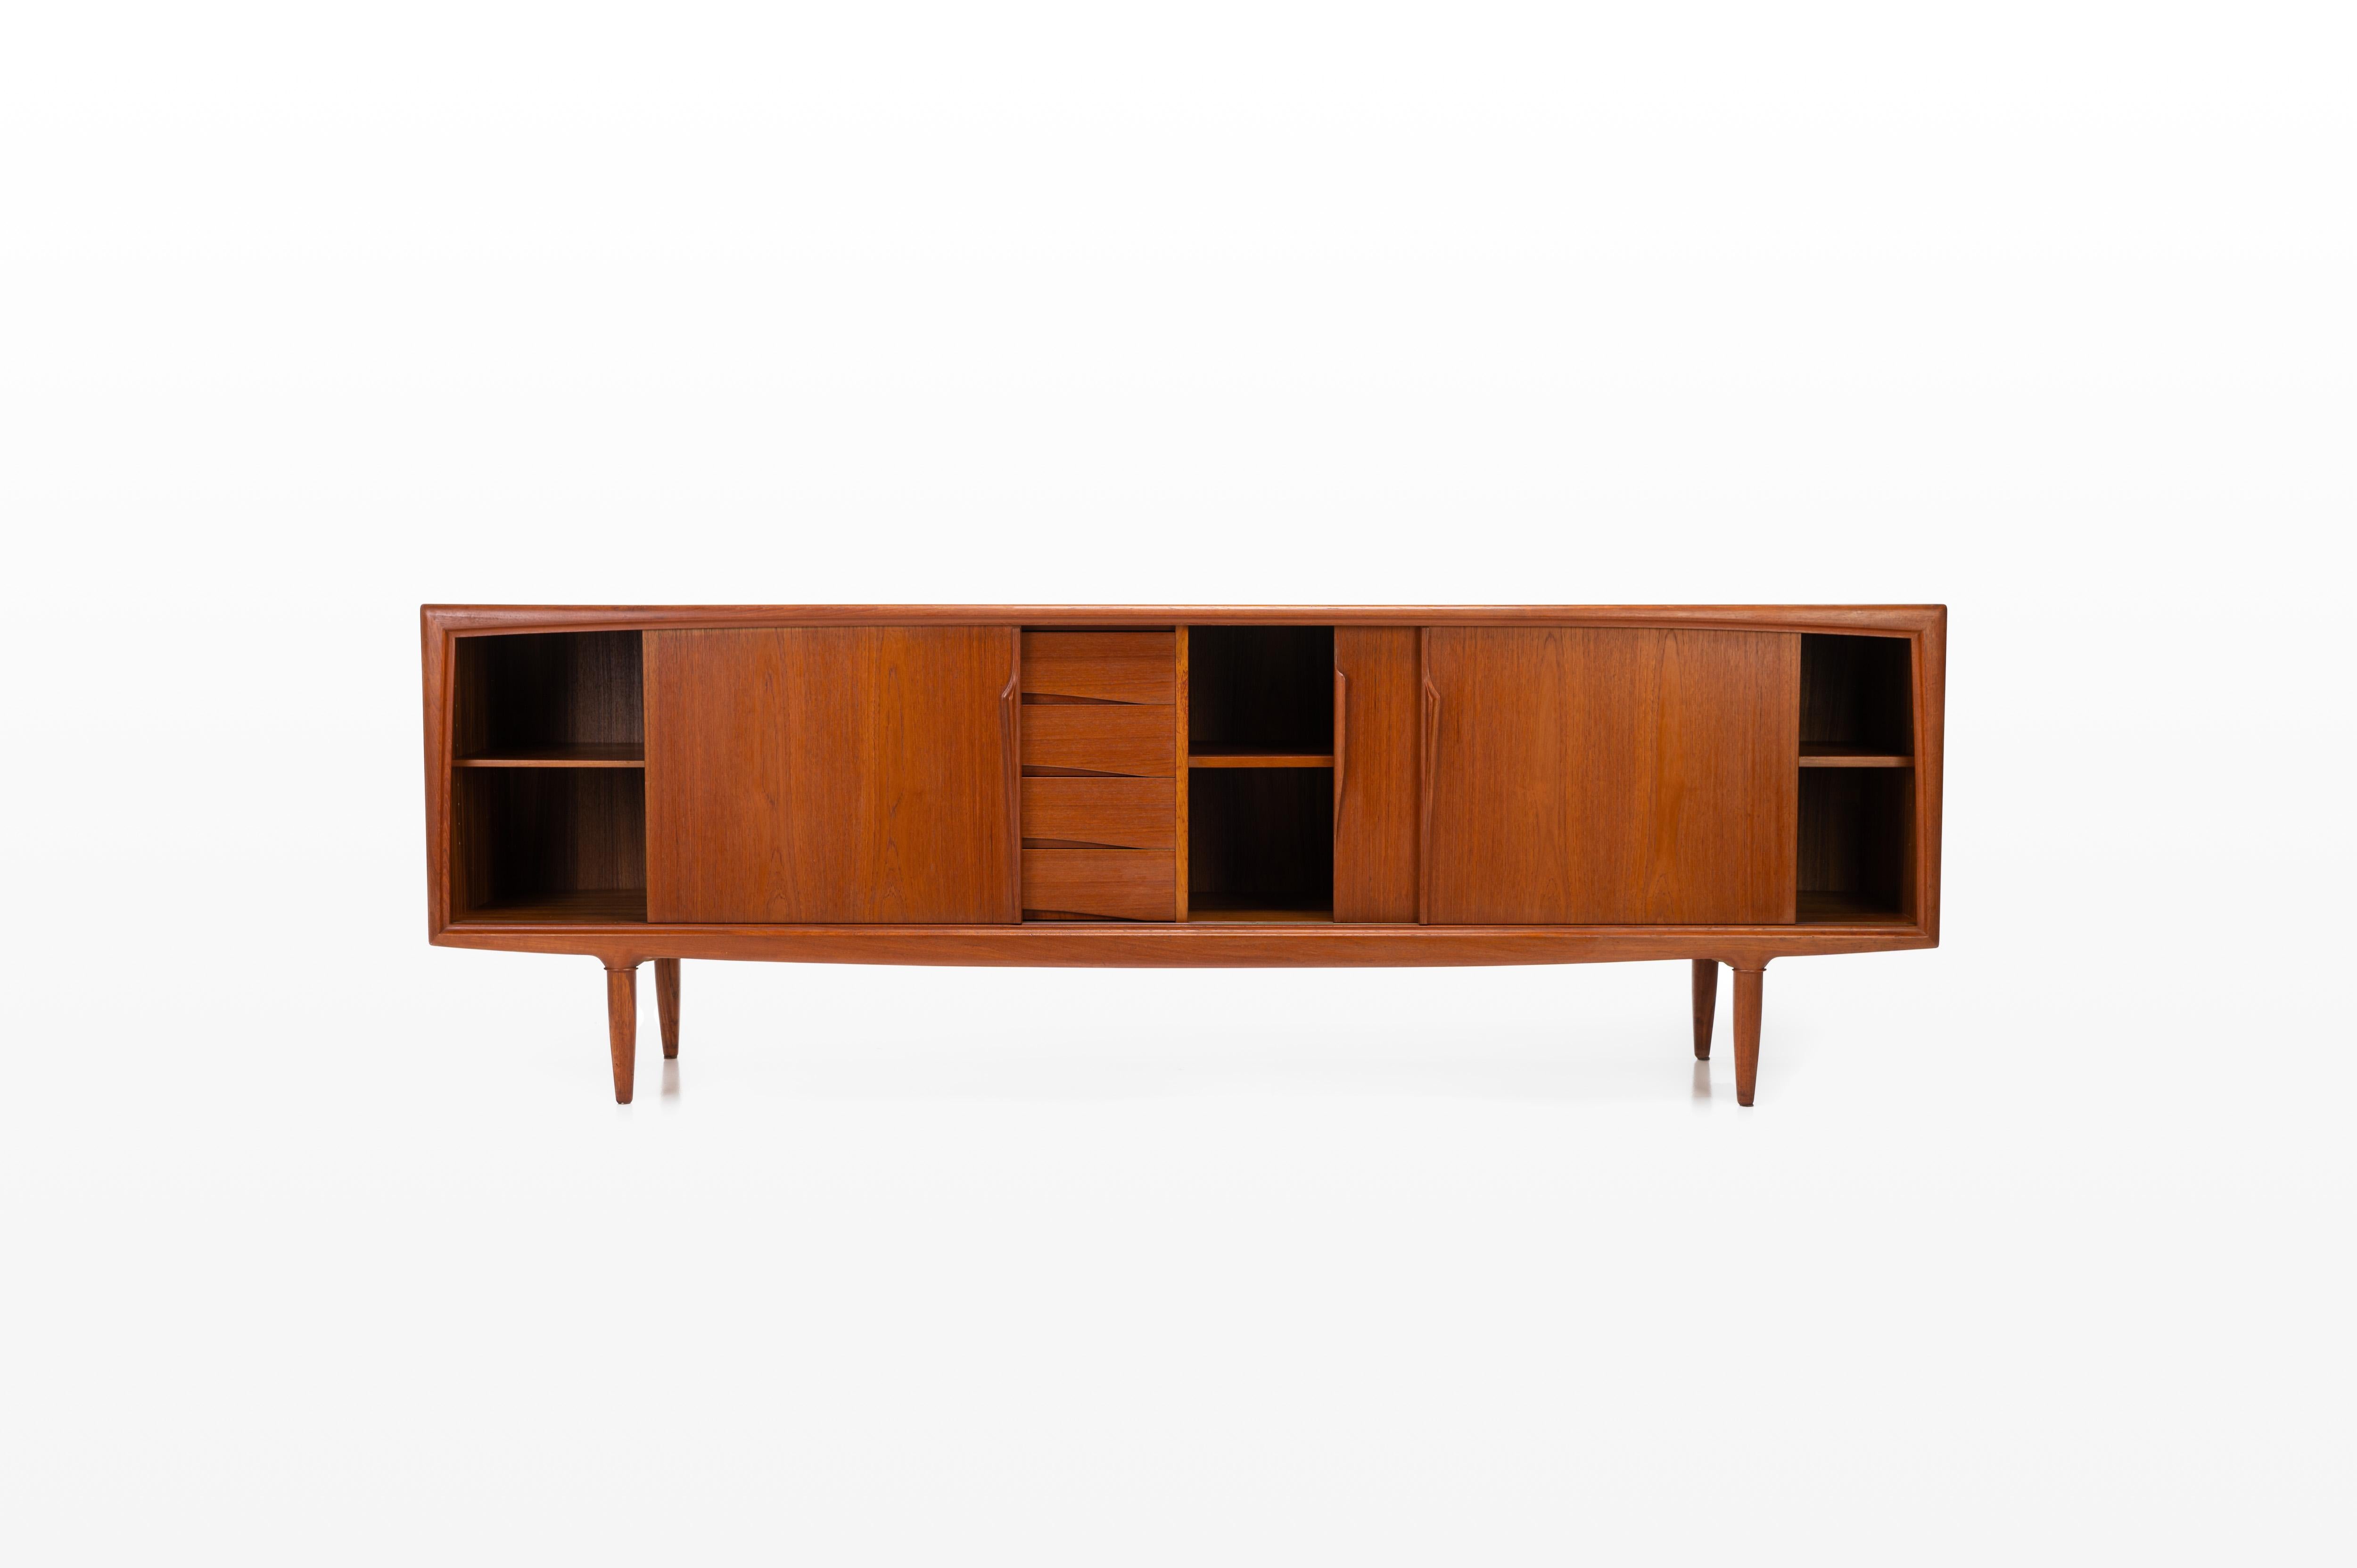 Produced by Axel Christensen Odder (ACO Møbler) and designed in the 1960s. Beautifully designed sideboard with elegant handles, four drawers and plenty of storage space with adjustable shelves.